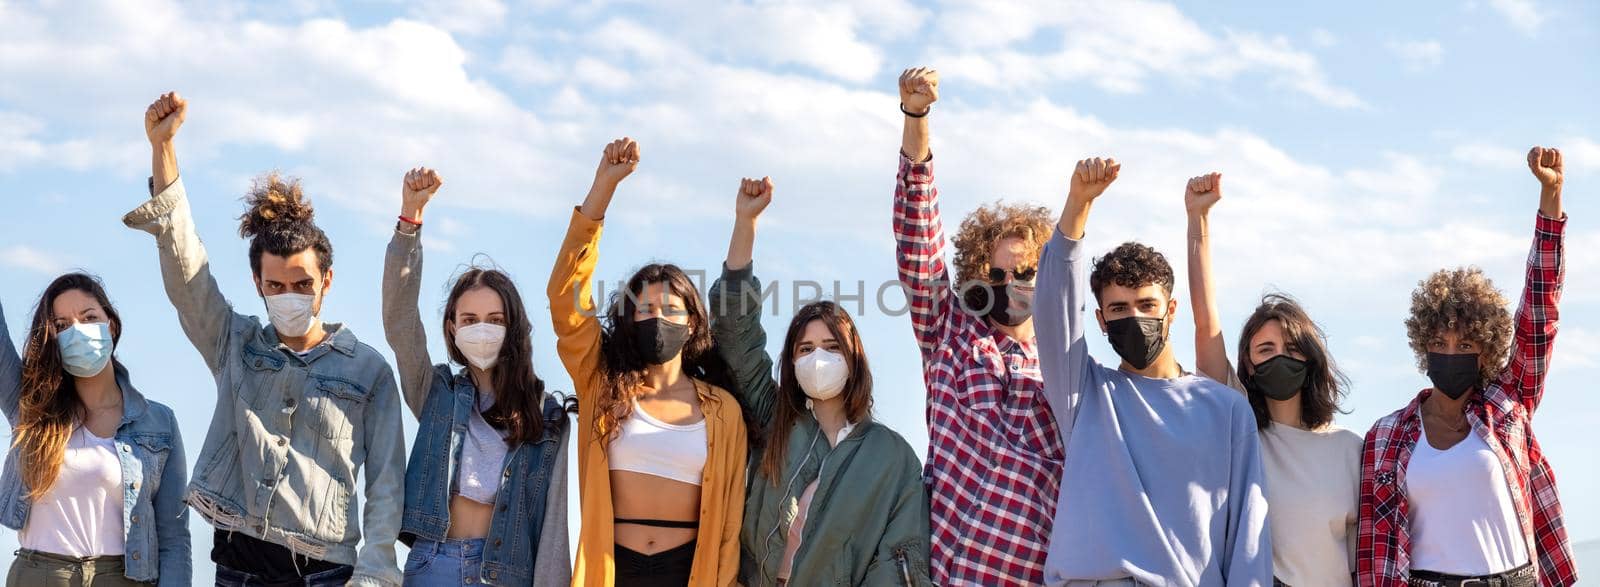 Panoramic image of multiracial activist protesters with fists raised up in the air wearing face mask protesting.. by Hoverstock